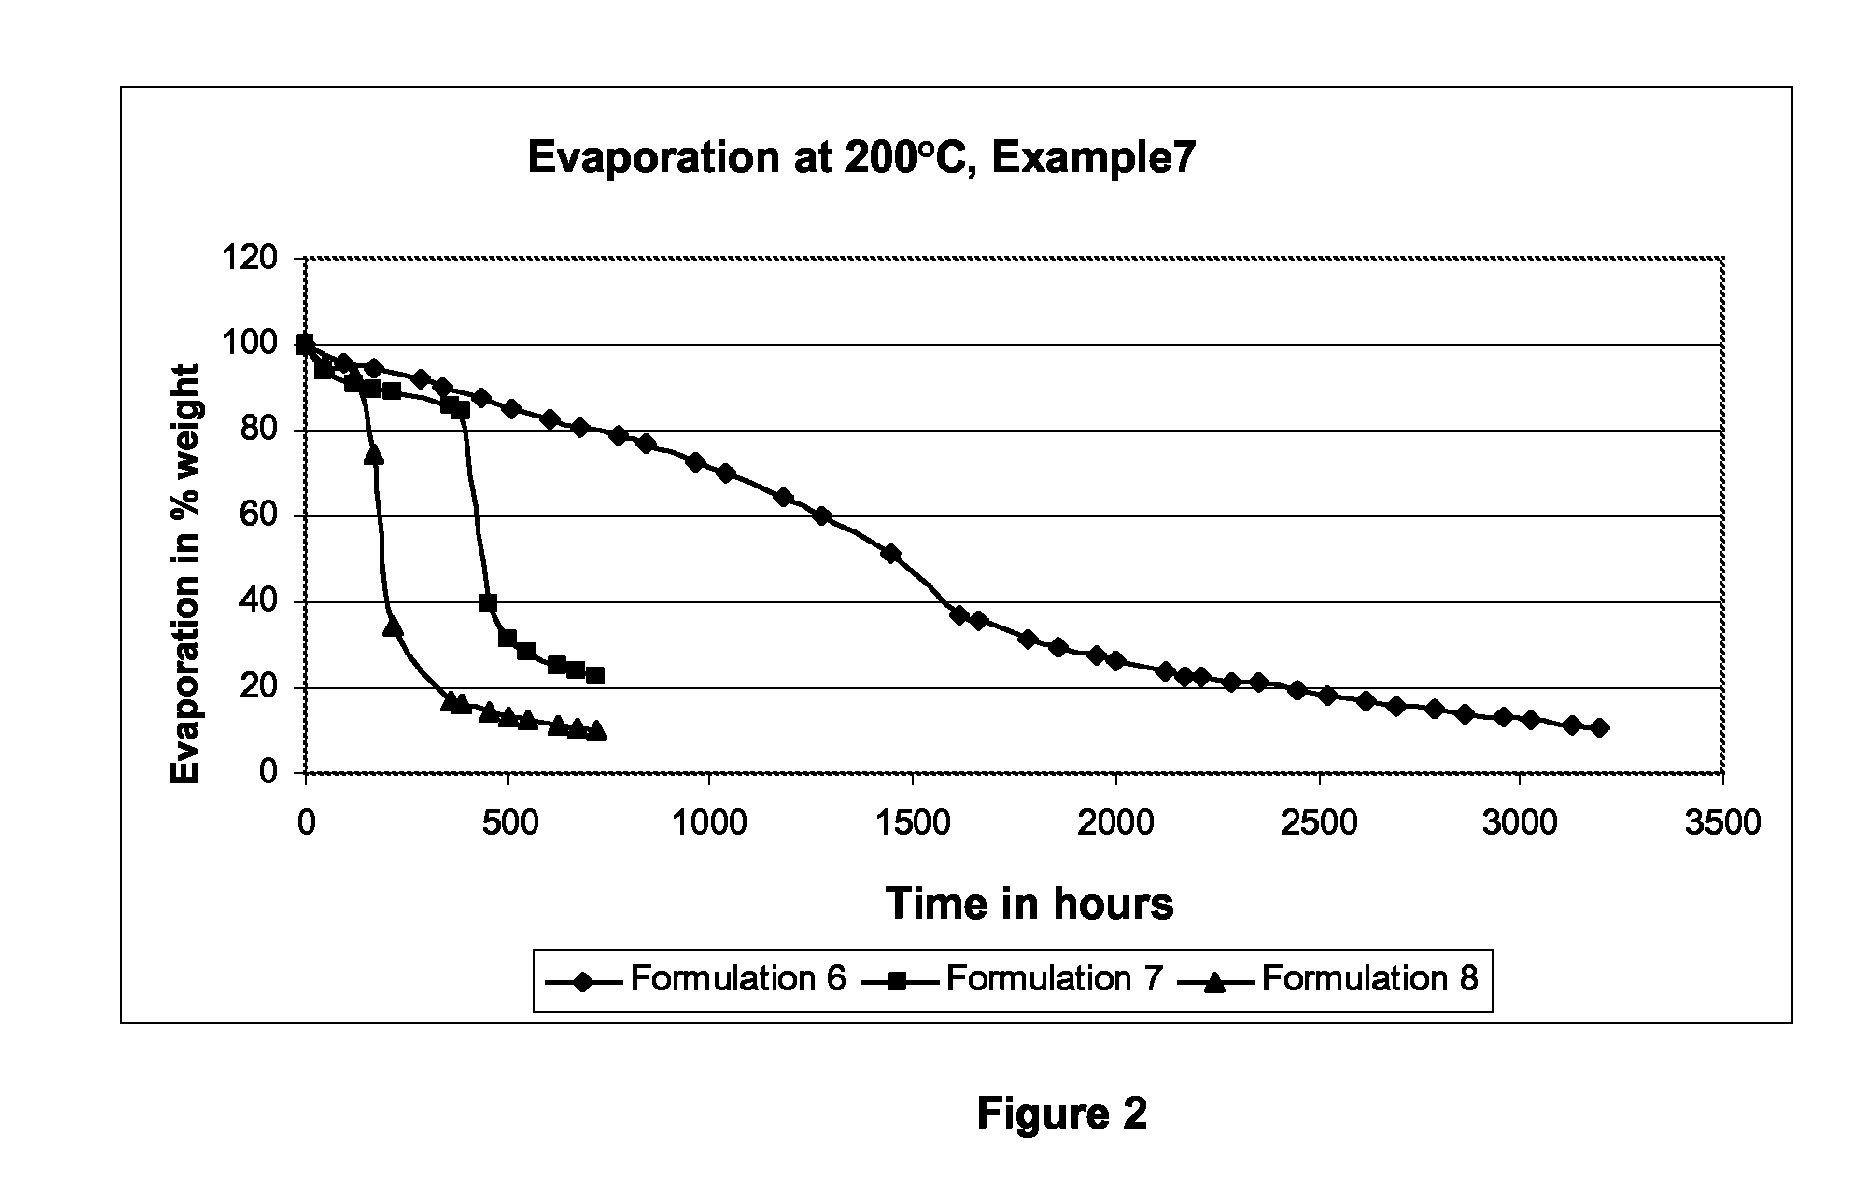 Use of an oligomer-based additive for stabilizing a lubricating composition for a conveyor chain